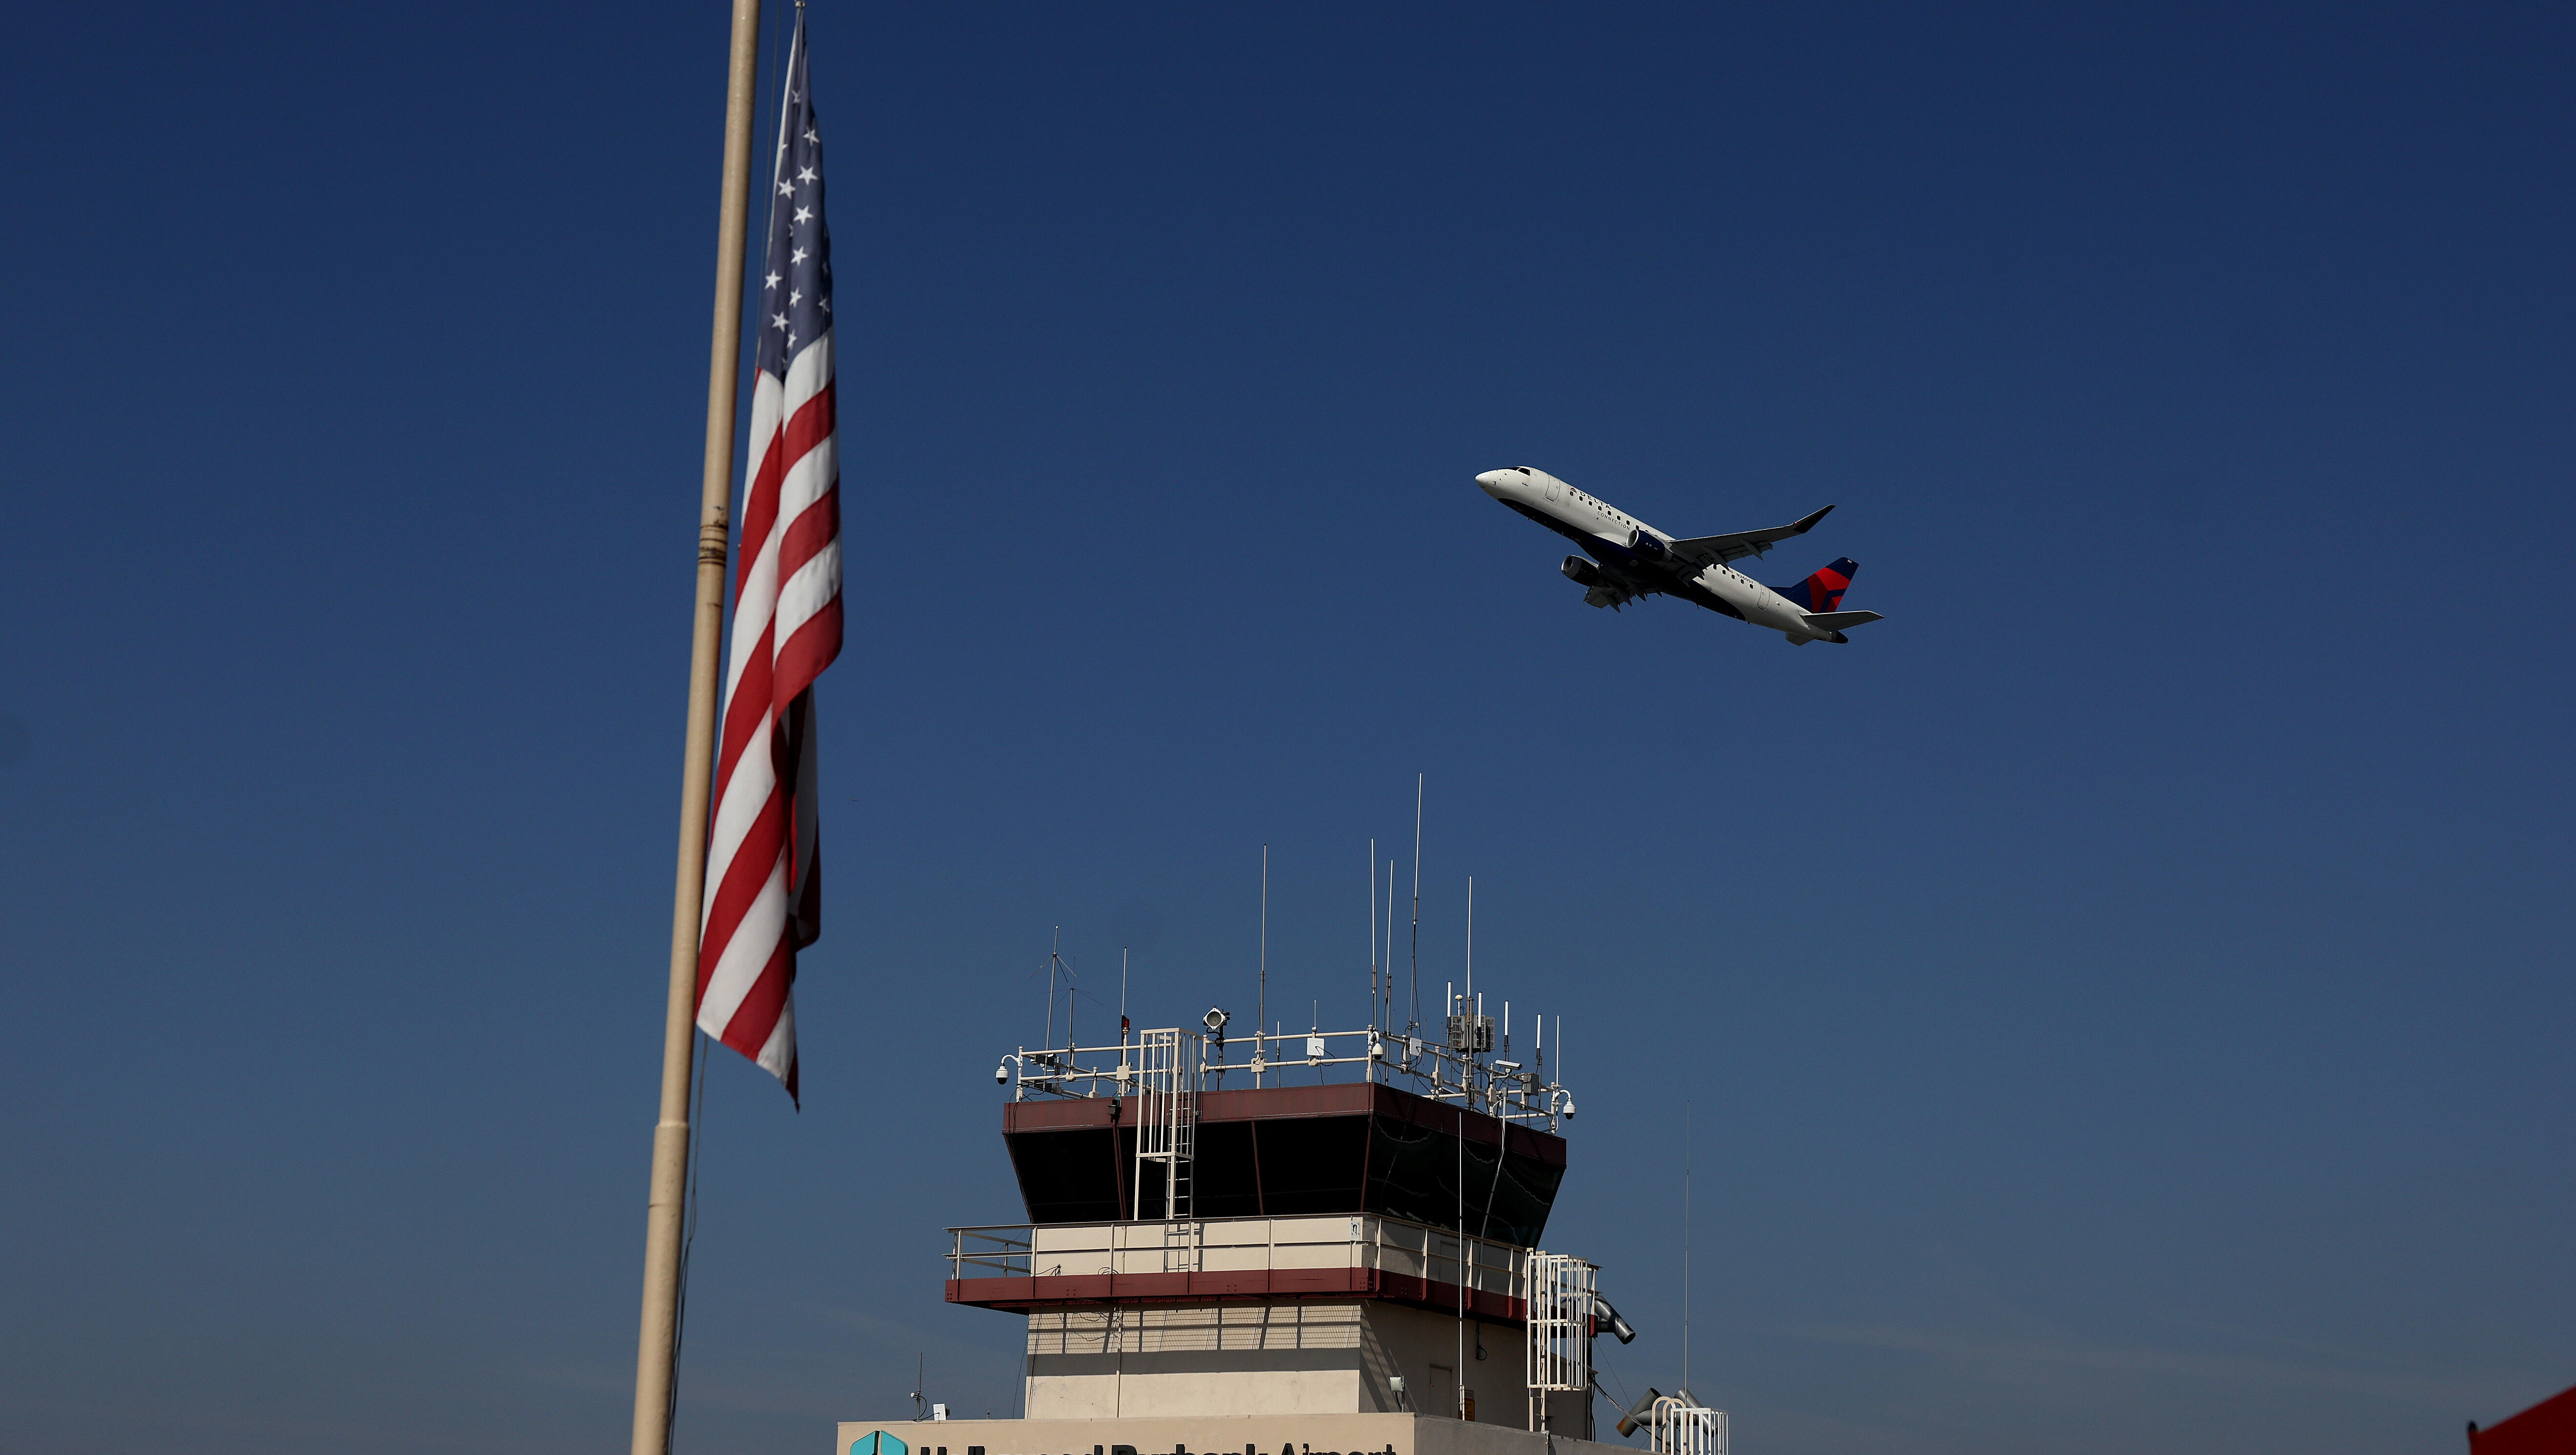 Government Shutdown Could Impact Air Travel